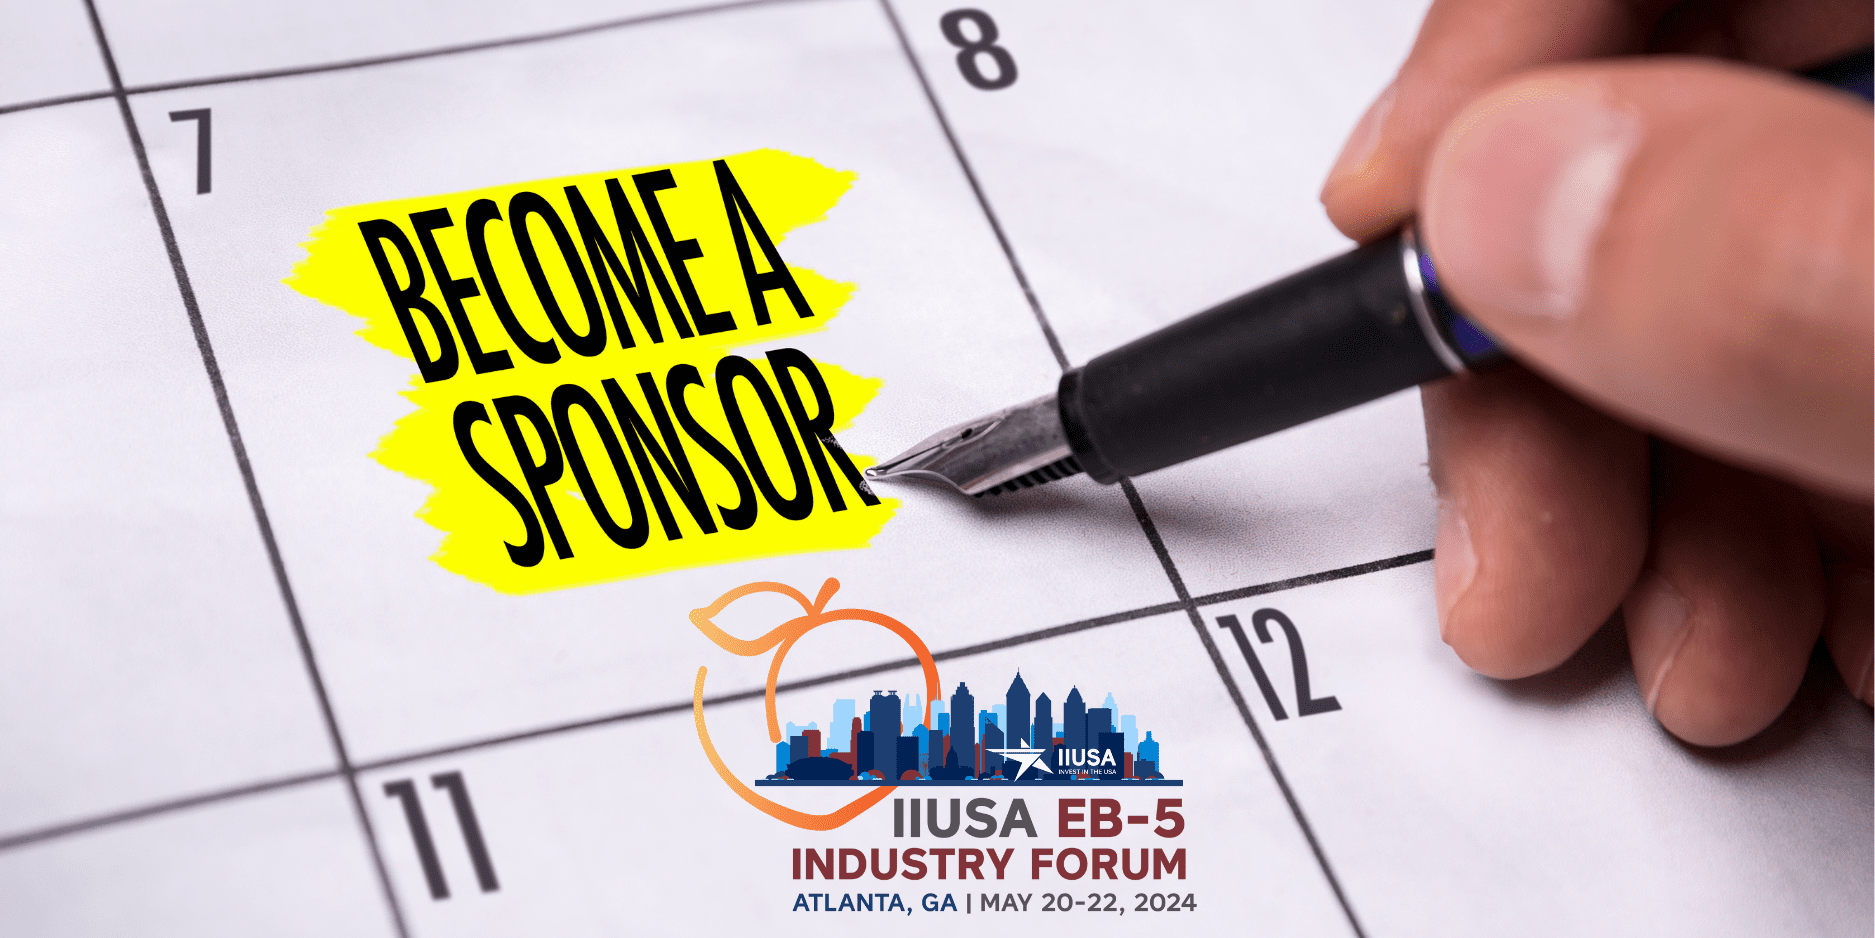 Last Chance to Secure Your Sponsorship for the 2024 EB-5 Industry Forum